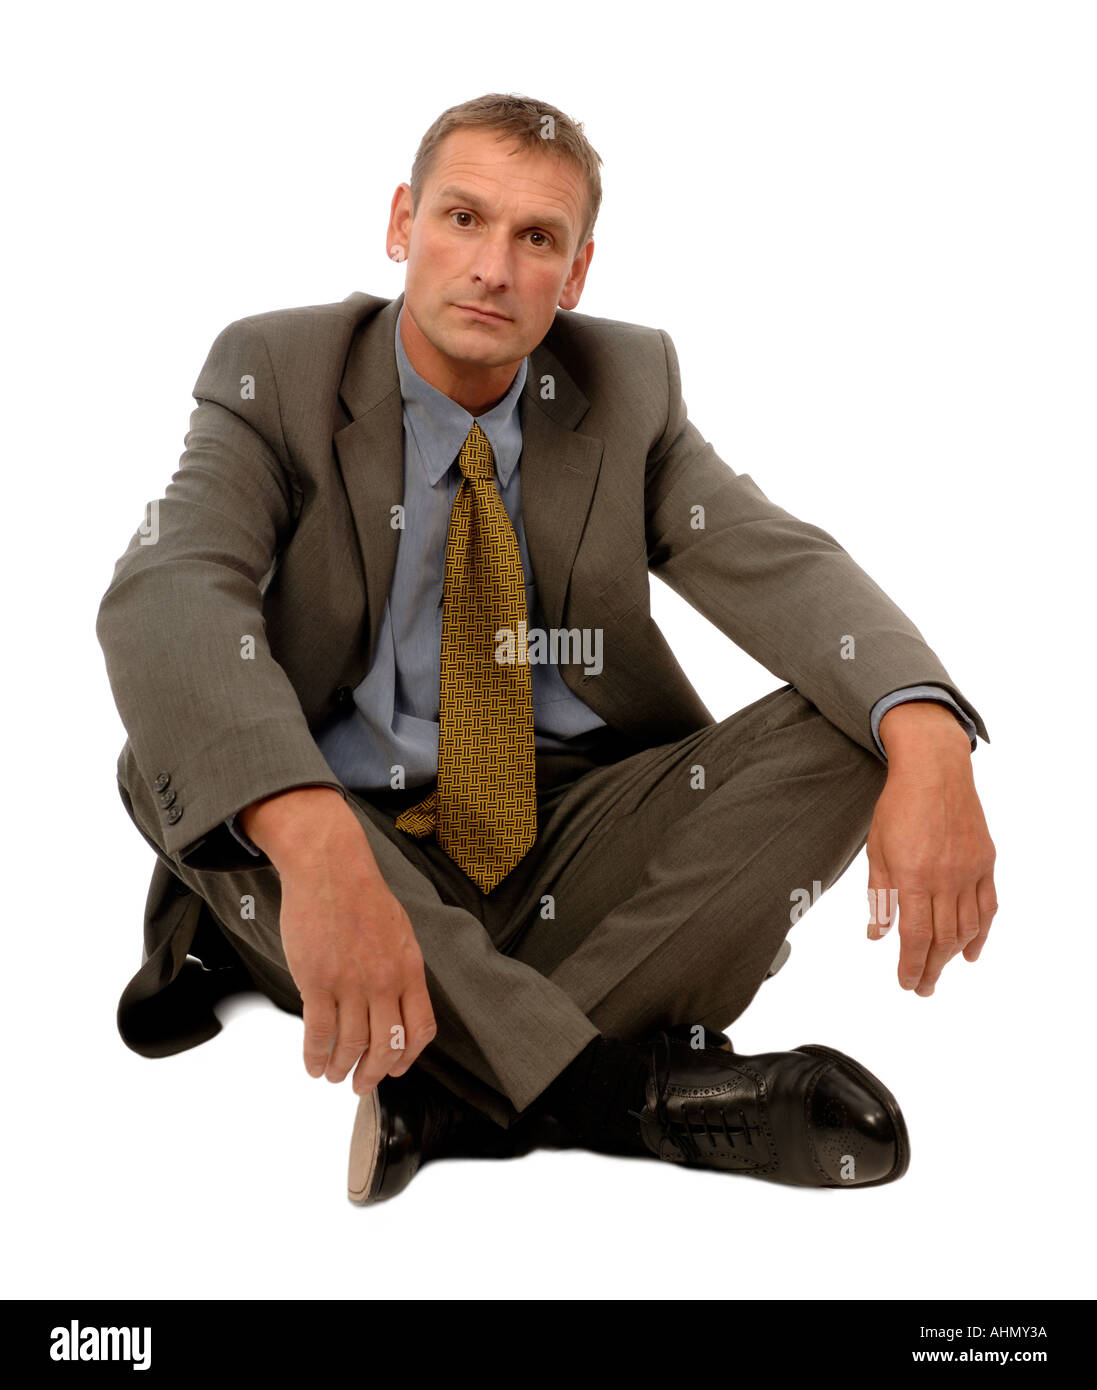 Businessman sitting on the floor Banque D'Images